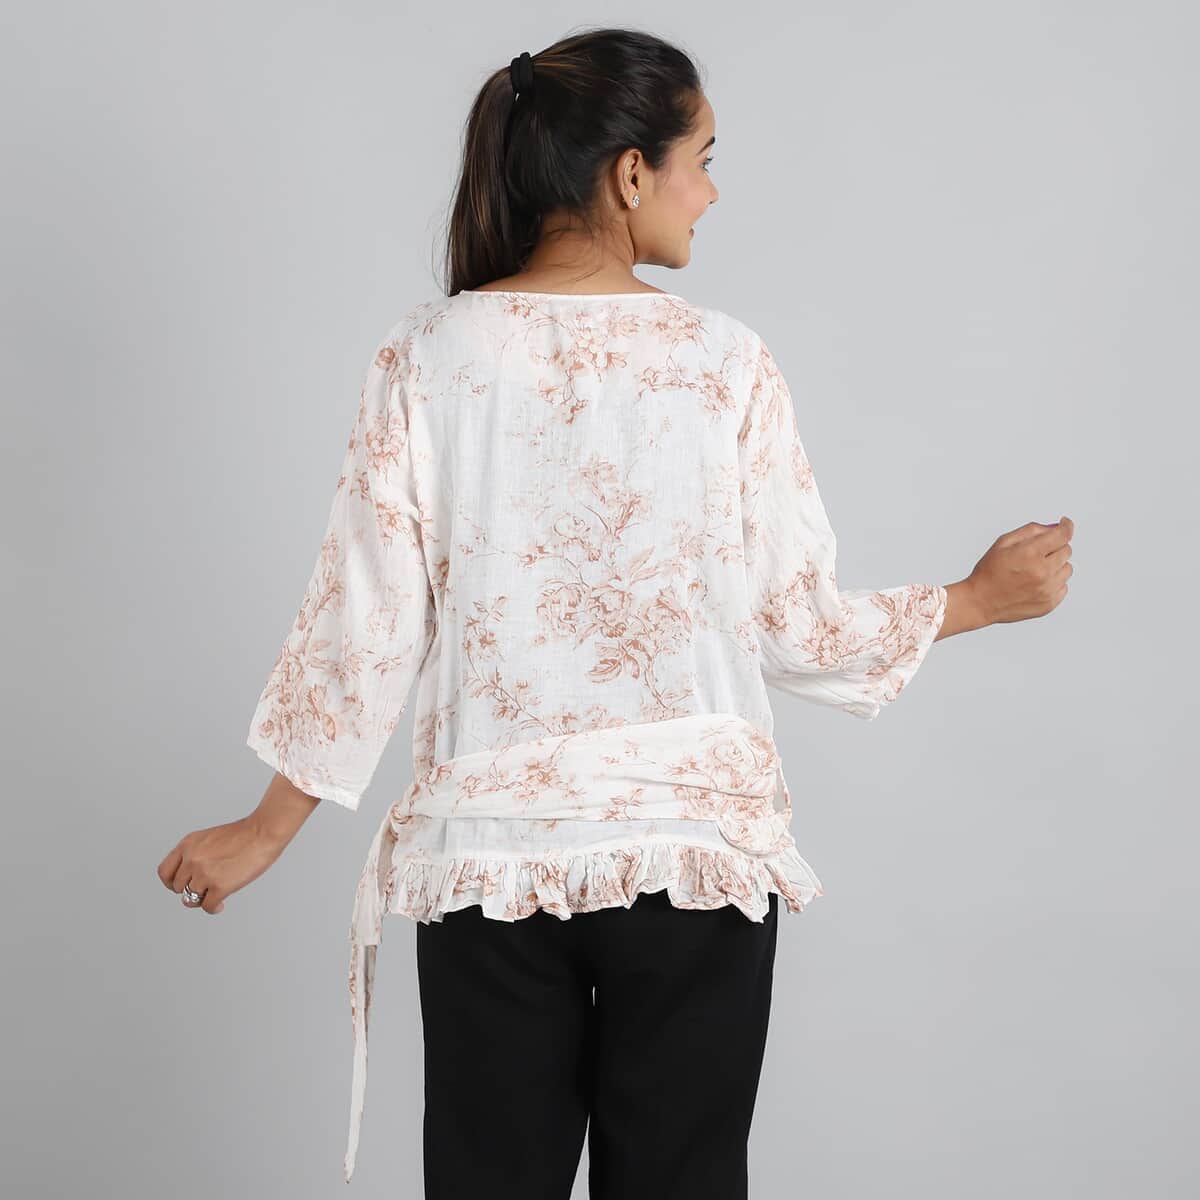 JOVIE Pink with Floral pattern Cotton Gauze Wrap Blouse with Frill Trim - One Size Missy image number 3